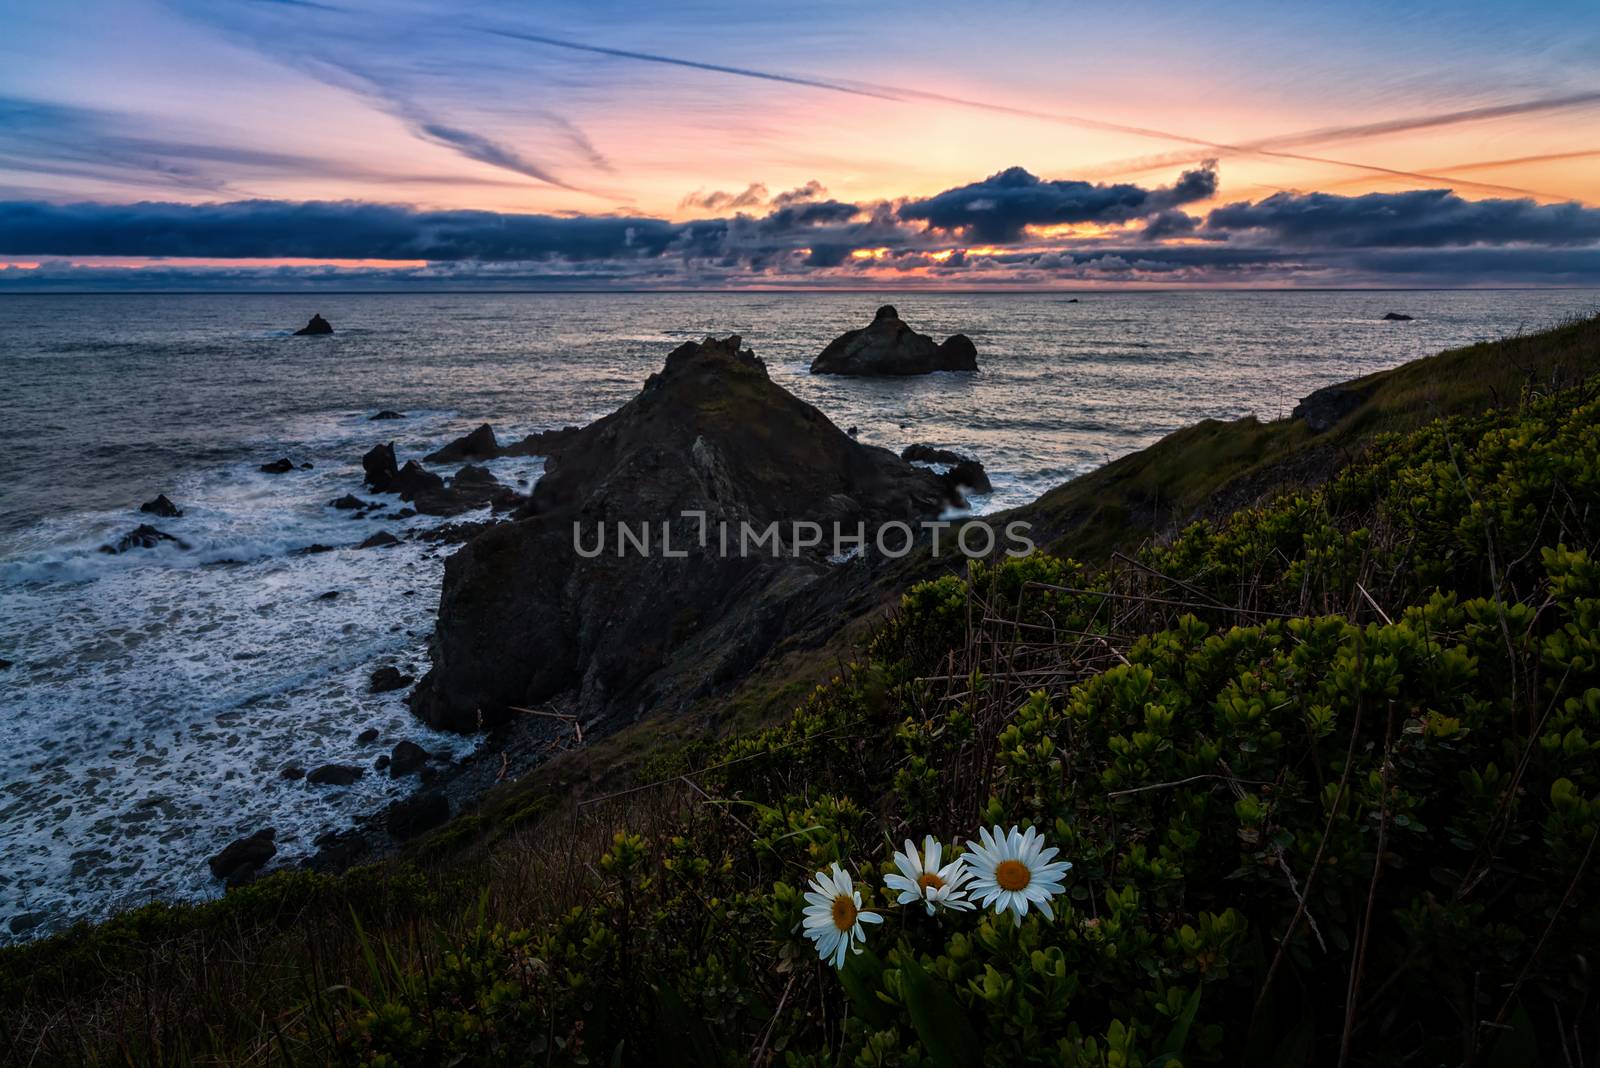 A Seascape Sunset in Humboldt County, California by backyard_photography